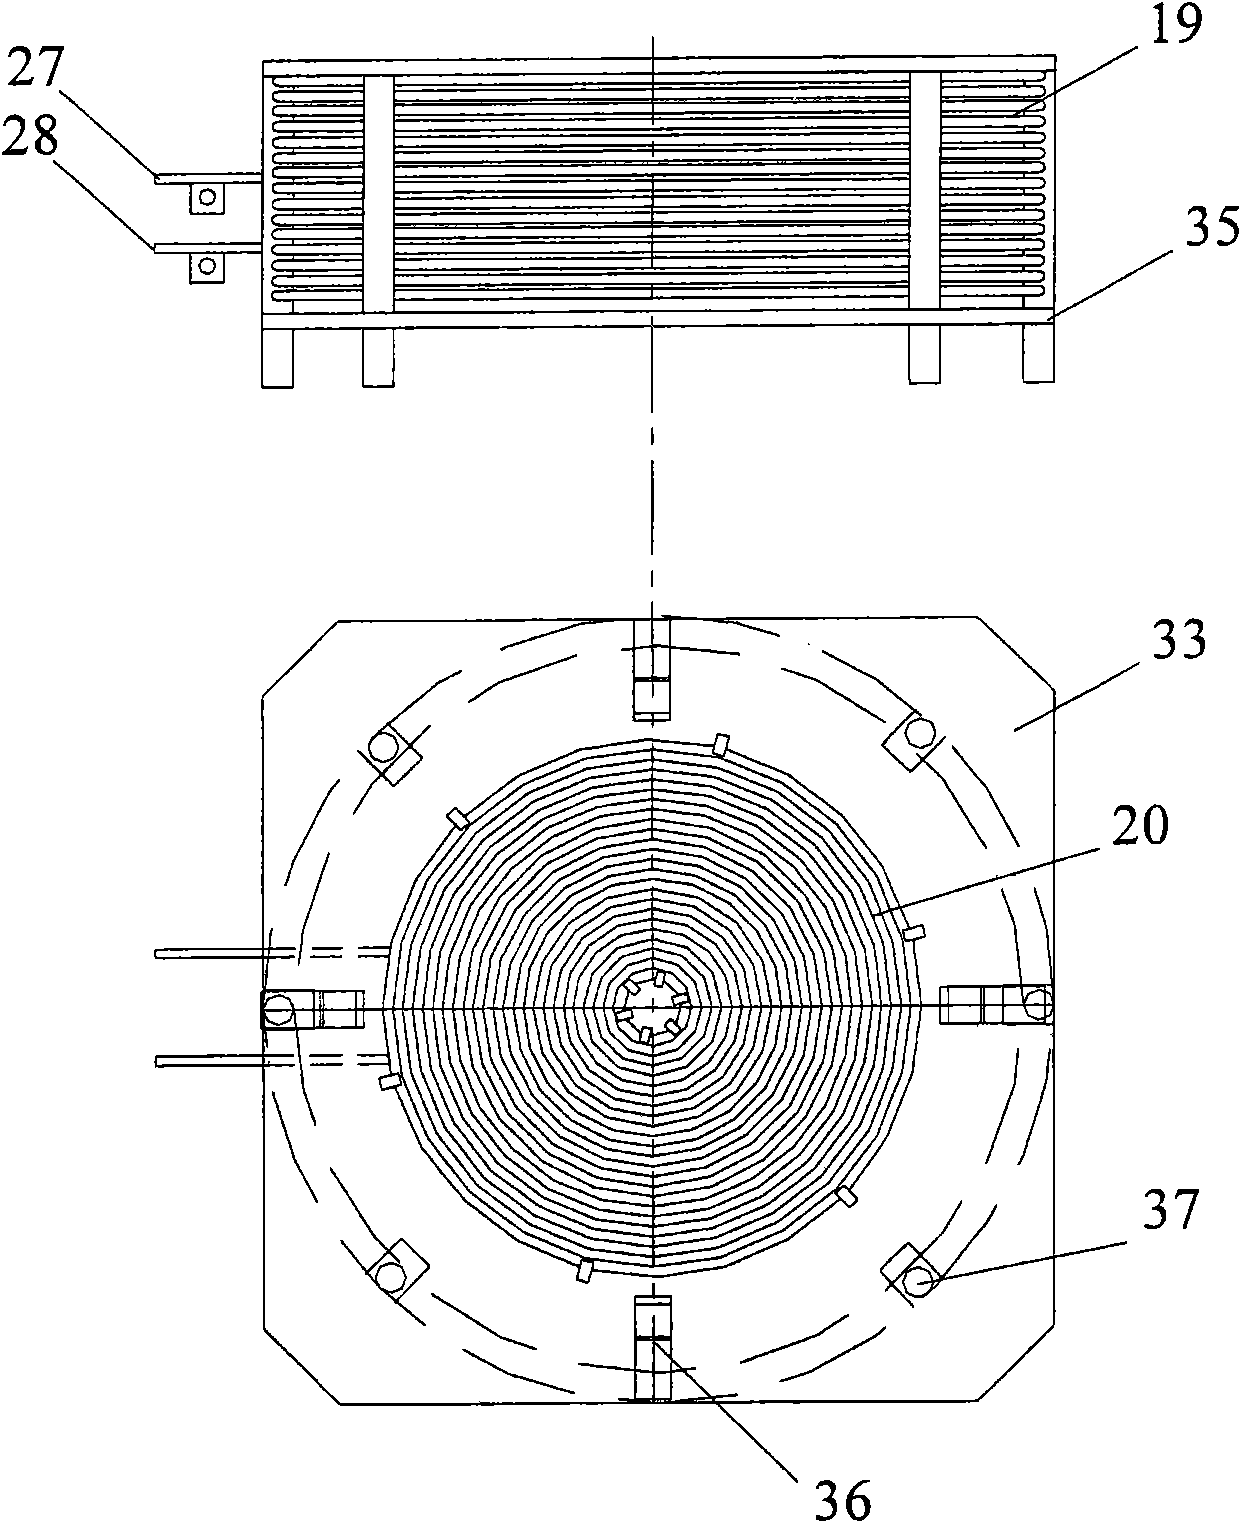 Solvent recovery method and device for organic solvent-containing dye and coating waste